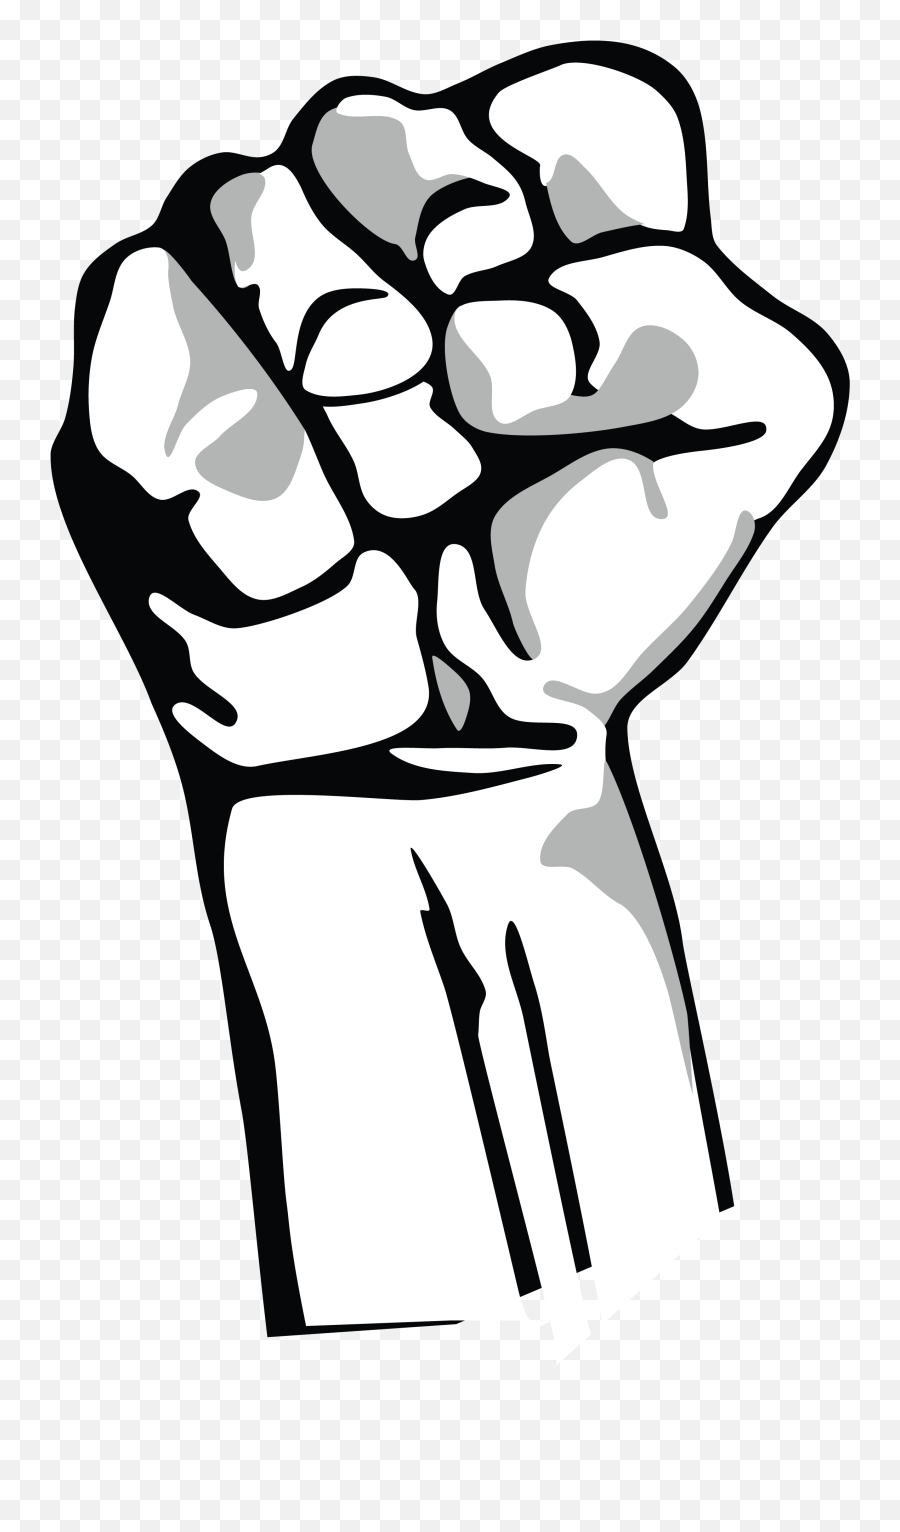 Fist Clipart Png - Color Fist Raised Fist 1748014 Vippng Raised Fist Png Transparent Emoji,Fist Png